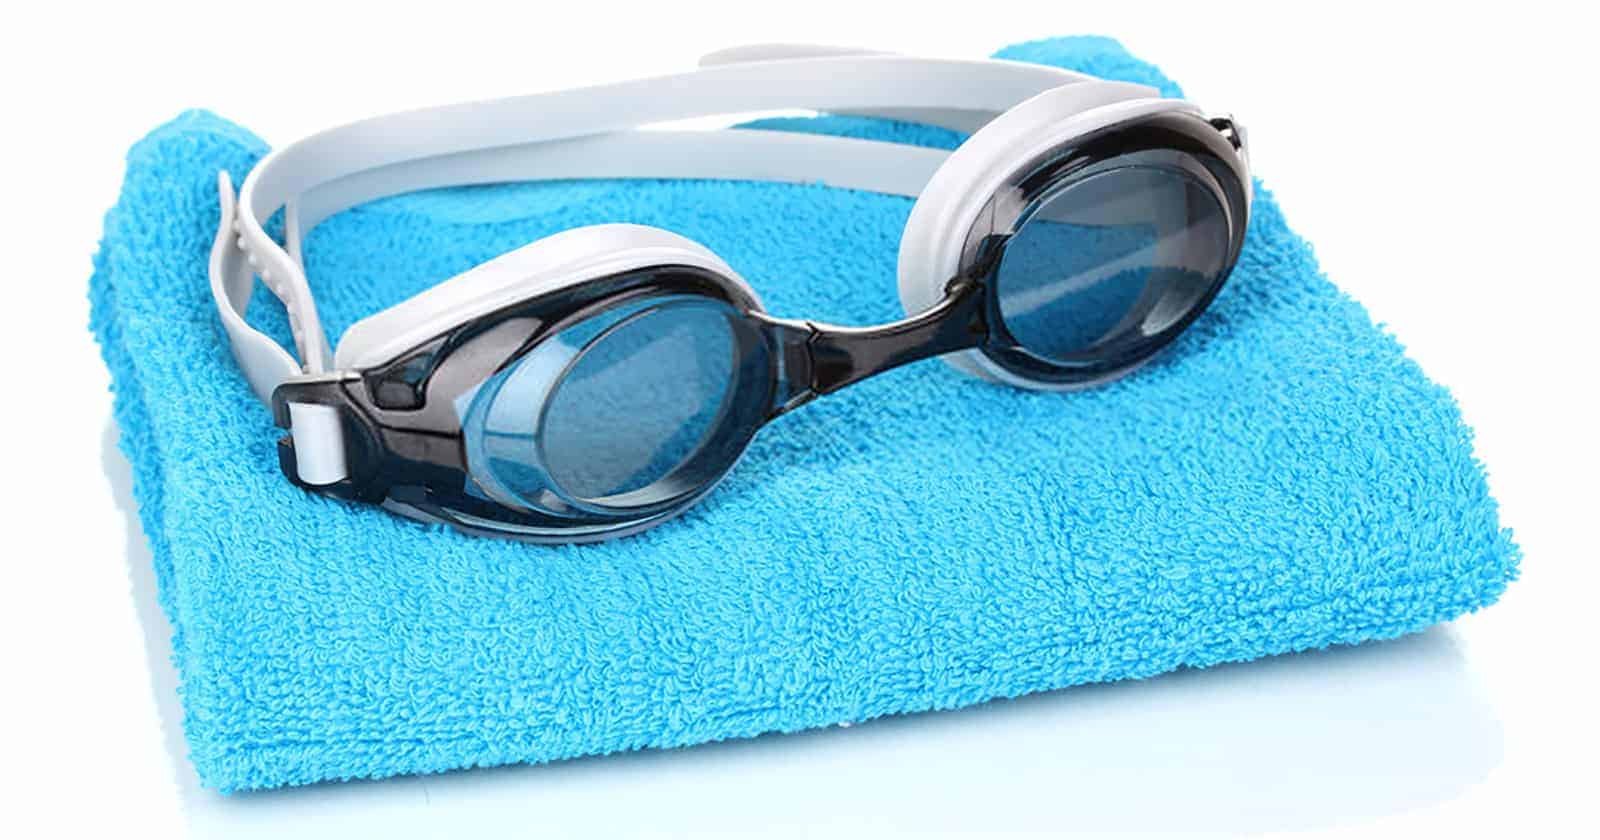 how to clean swimming goggles